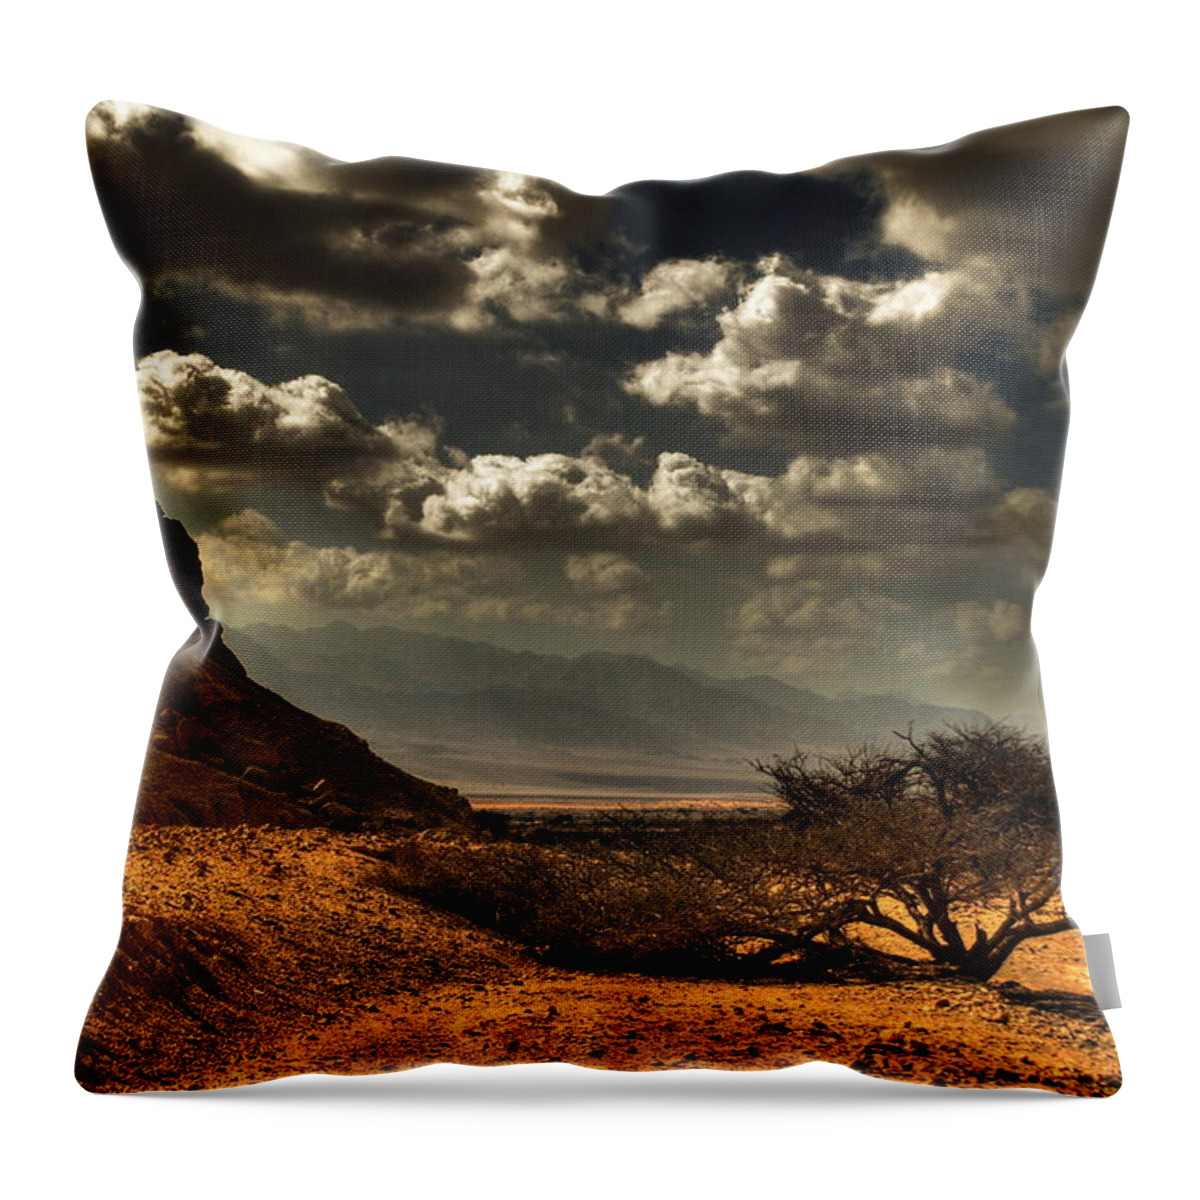 Scenics Throw Pillow featuring the photograph Desert Mountains With Cloudy Sky by Avi Morag Photography